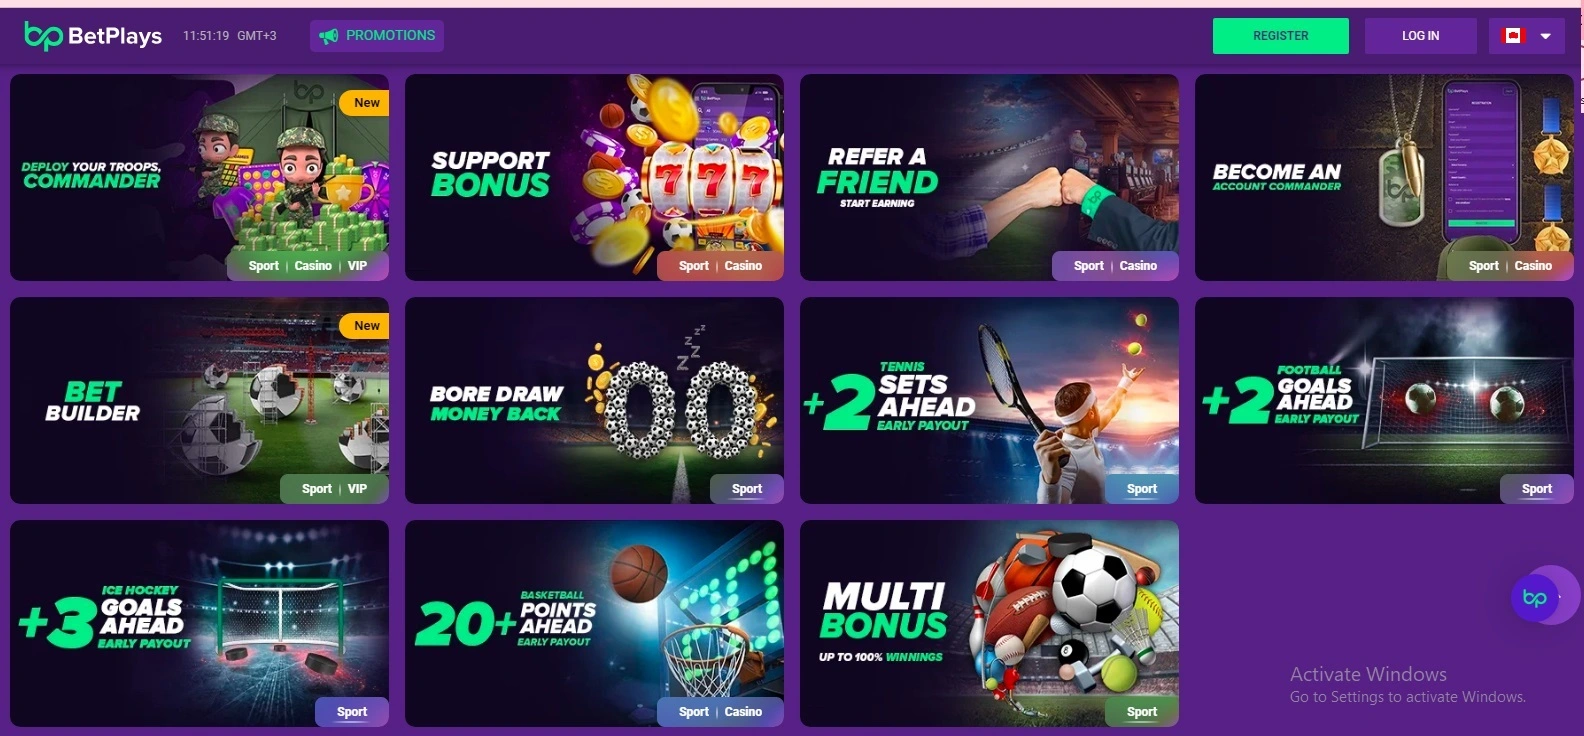 BetPlays sports promotions